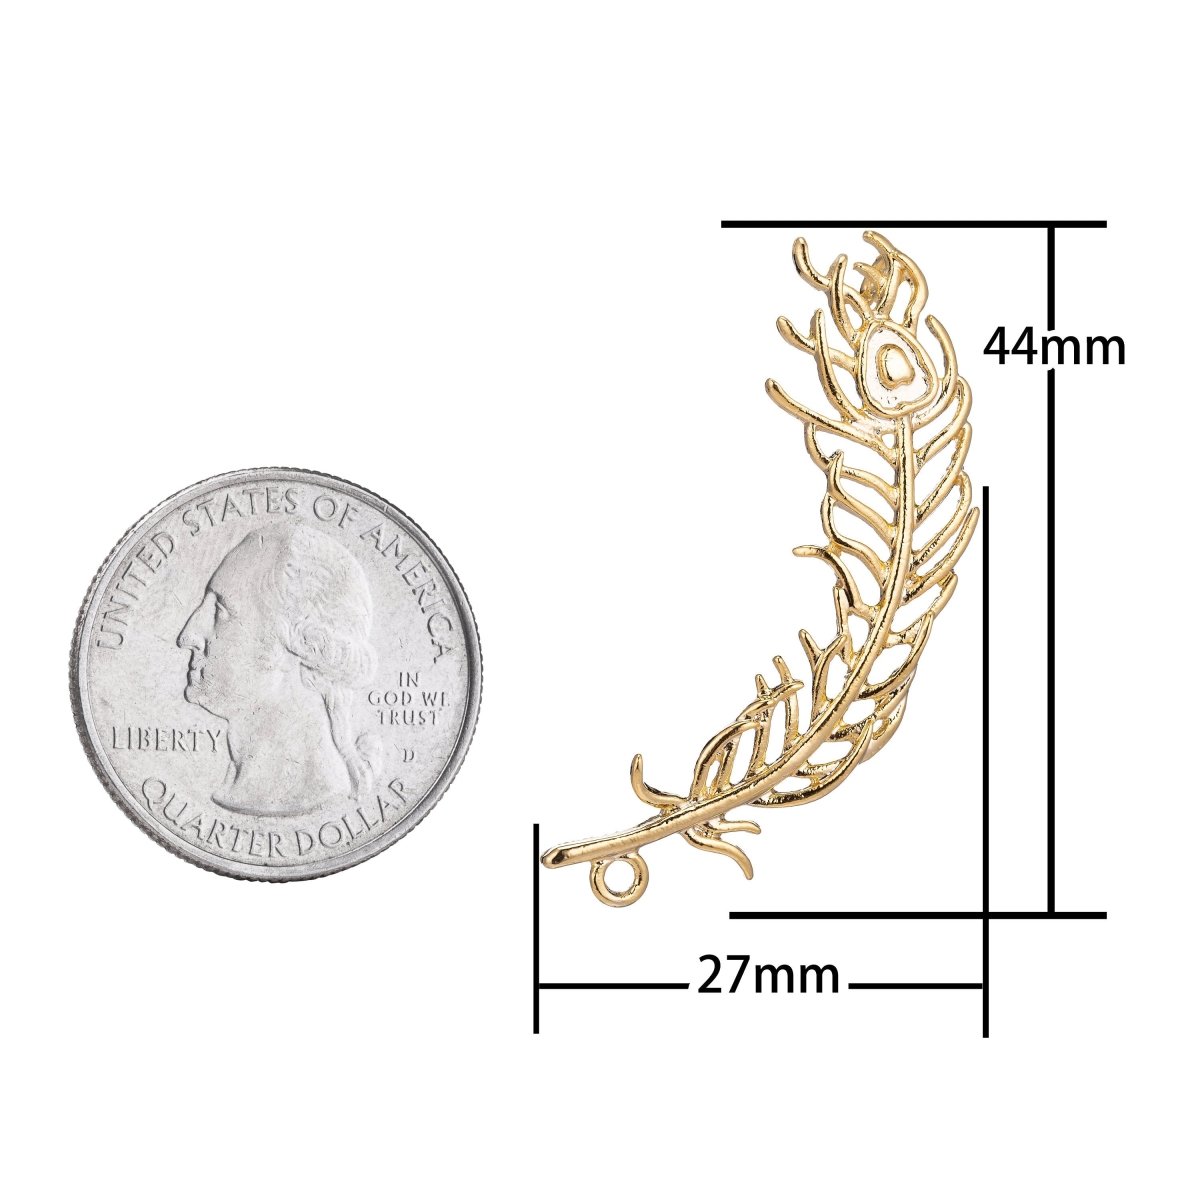 18K Gold Filled Peacock Feather Charm Connector for Necklace Bracelet Jewelry Making Supplies F-762 - DLUXCA